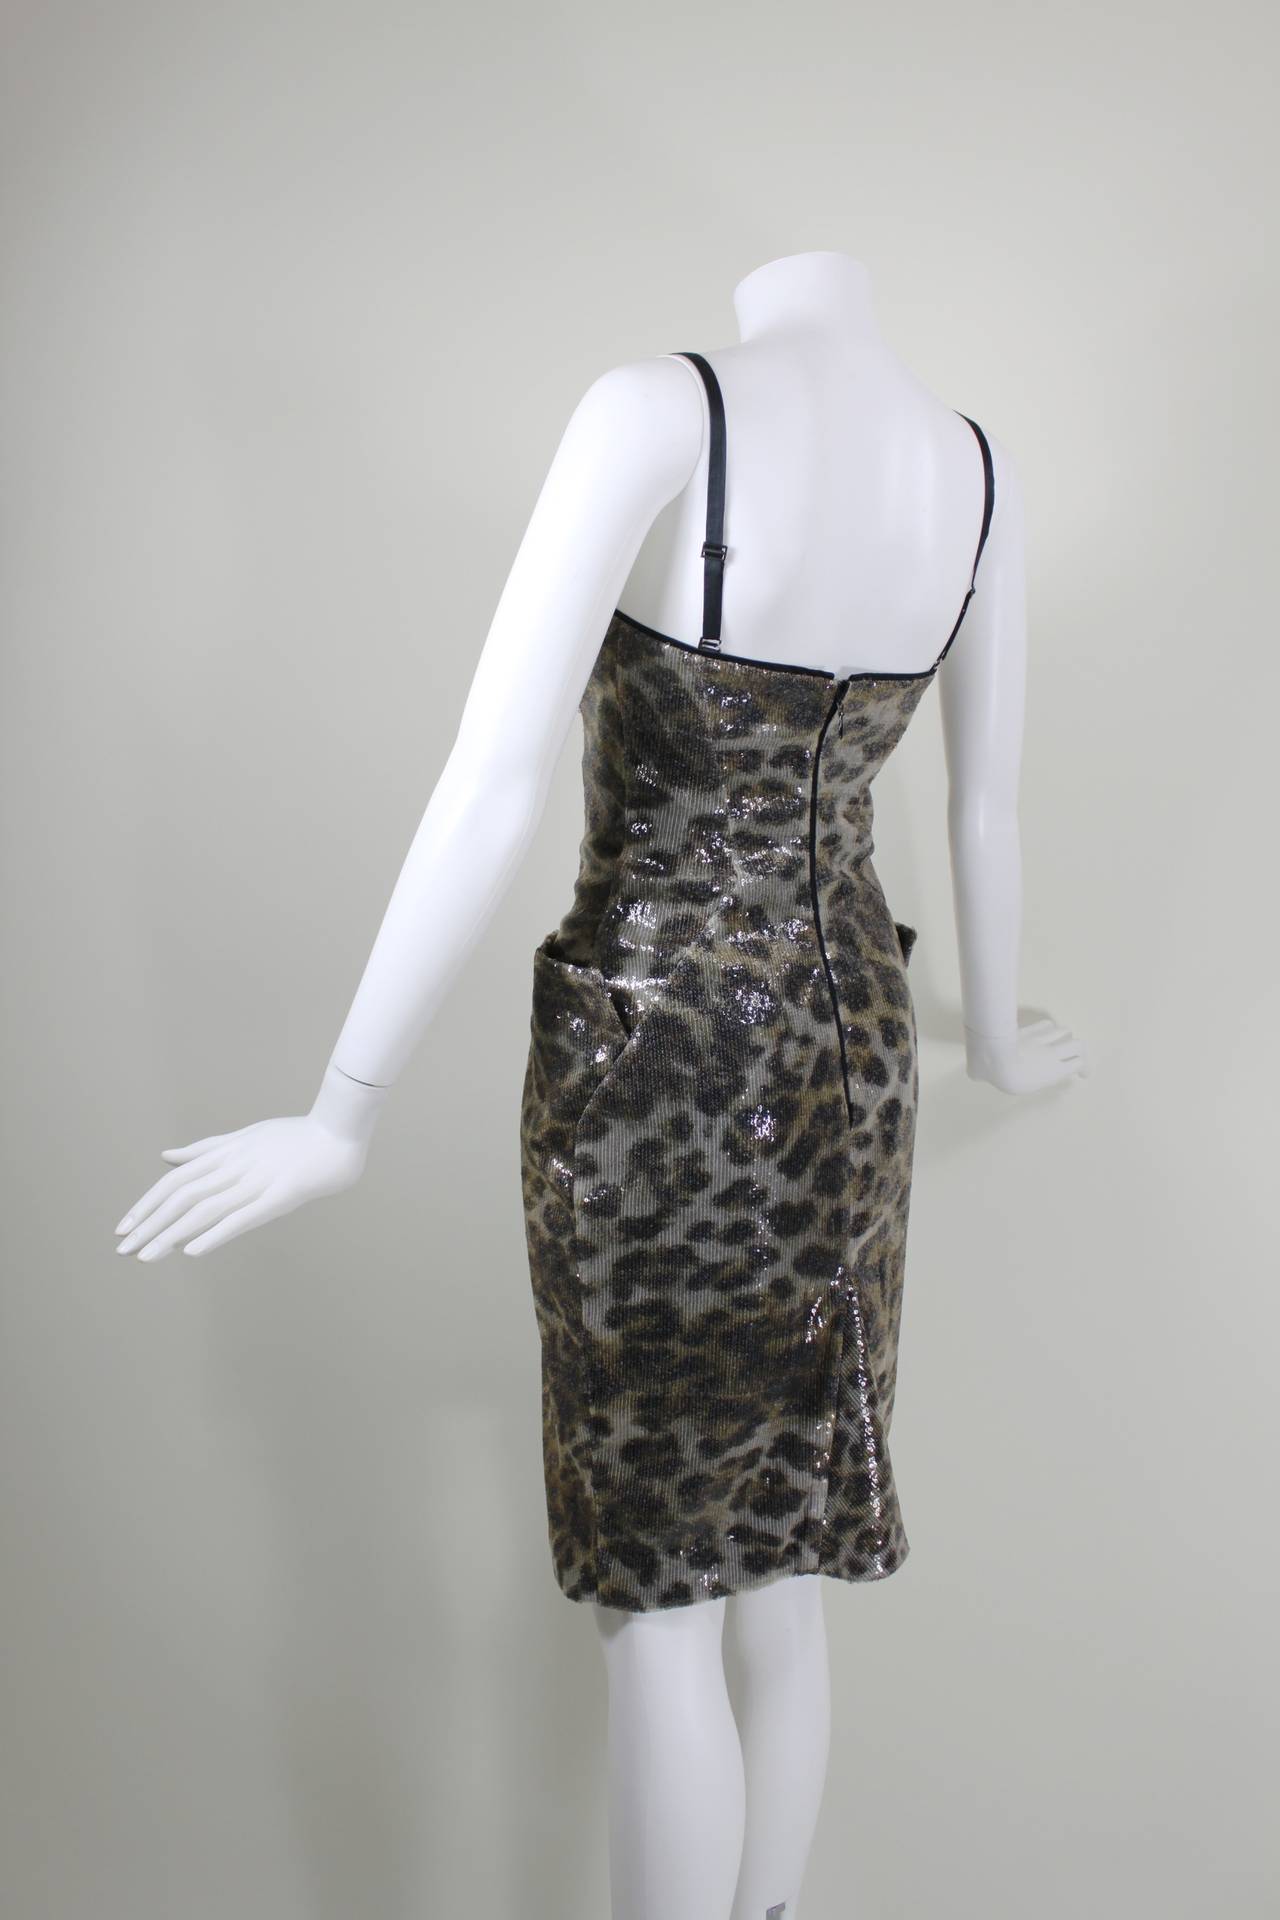 An architectural, sexy cocktail dress from Vivienne Westwood. The bodice is crafted into the designer's signature bustier silhouette and features two structured pockets at the hip. A playful leopard print is accented with a clear sequin overlay to